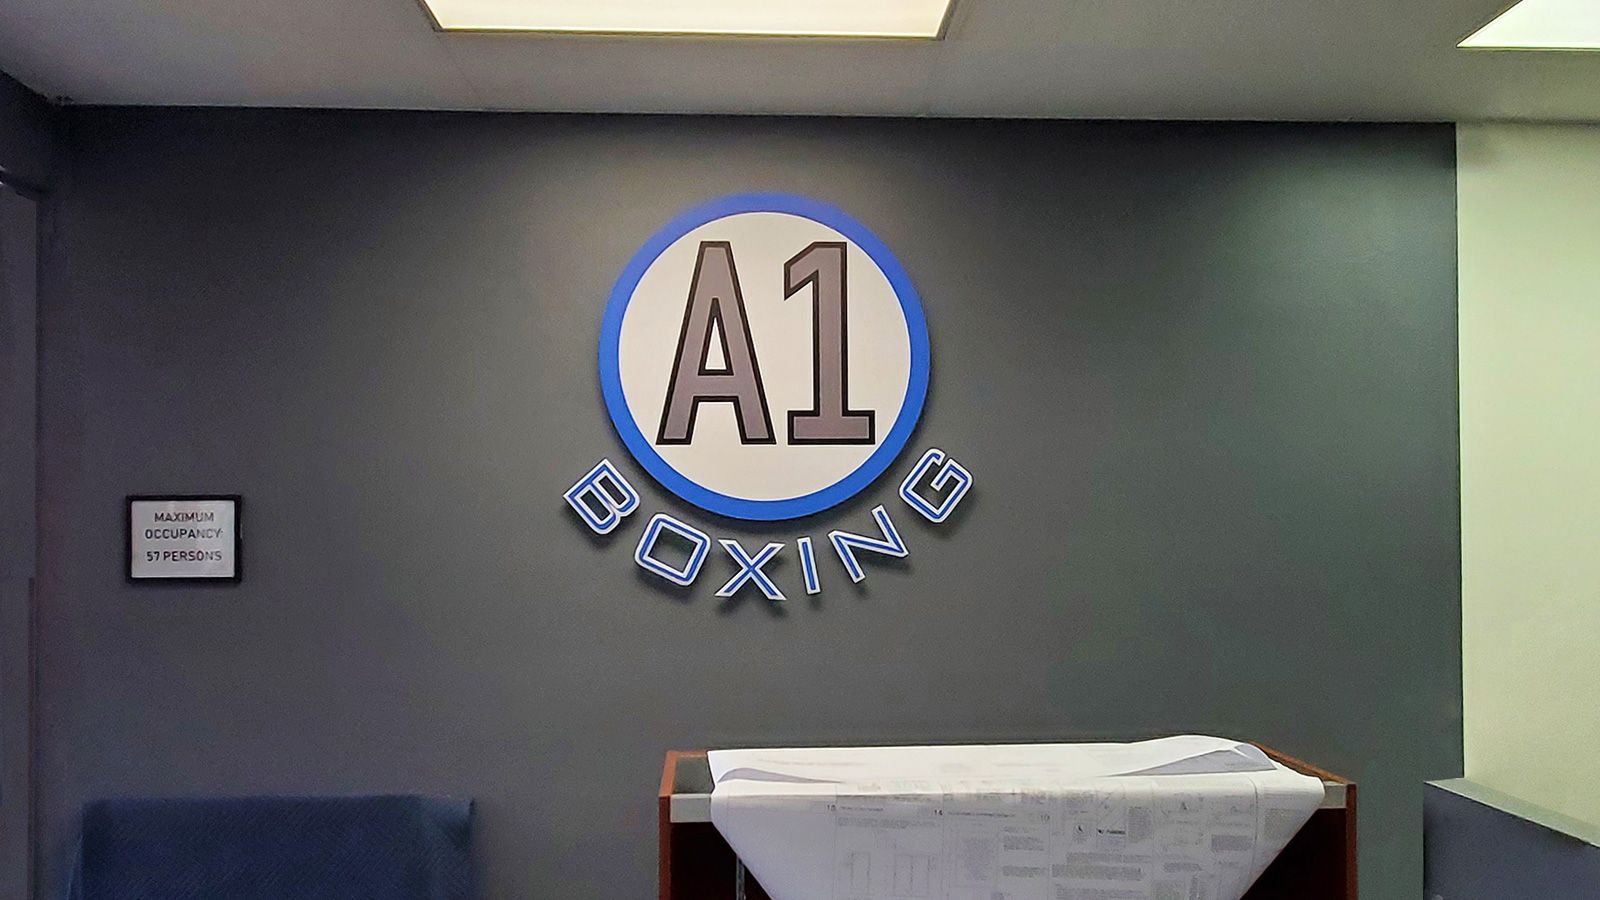 A1 boxing acrylic sign